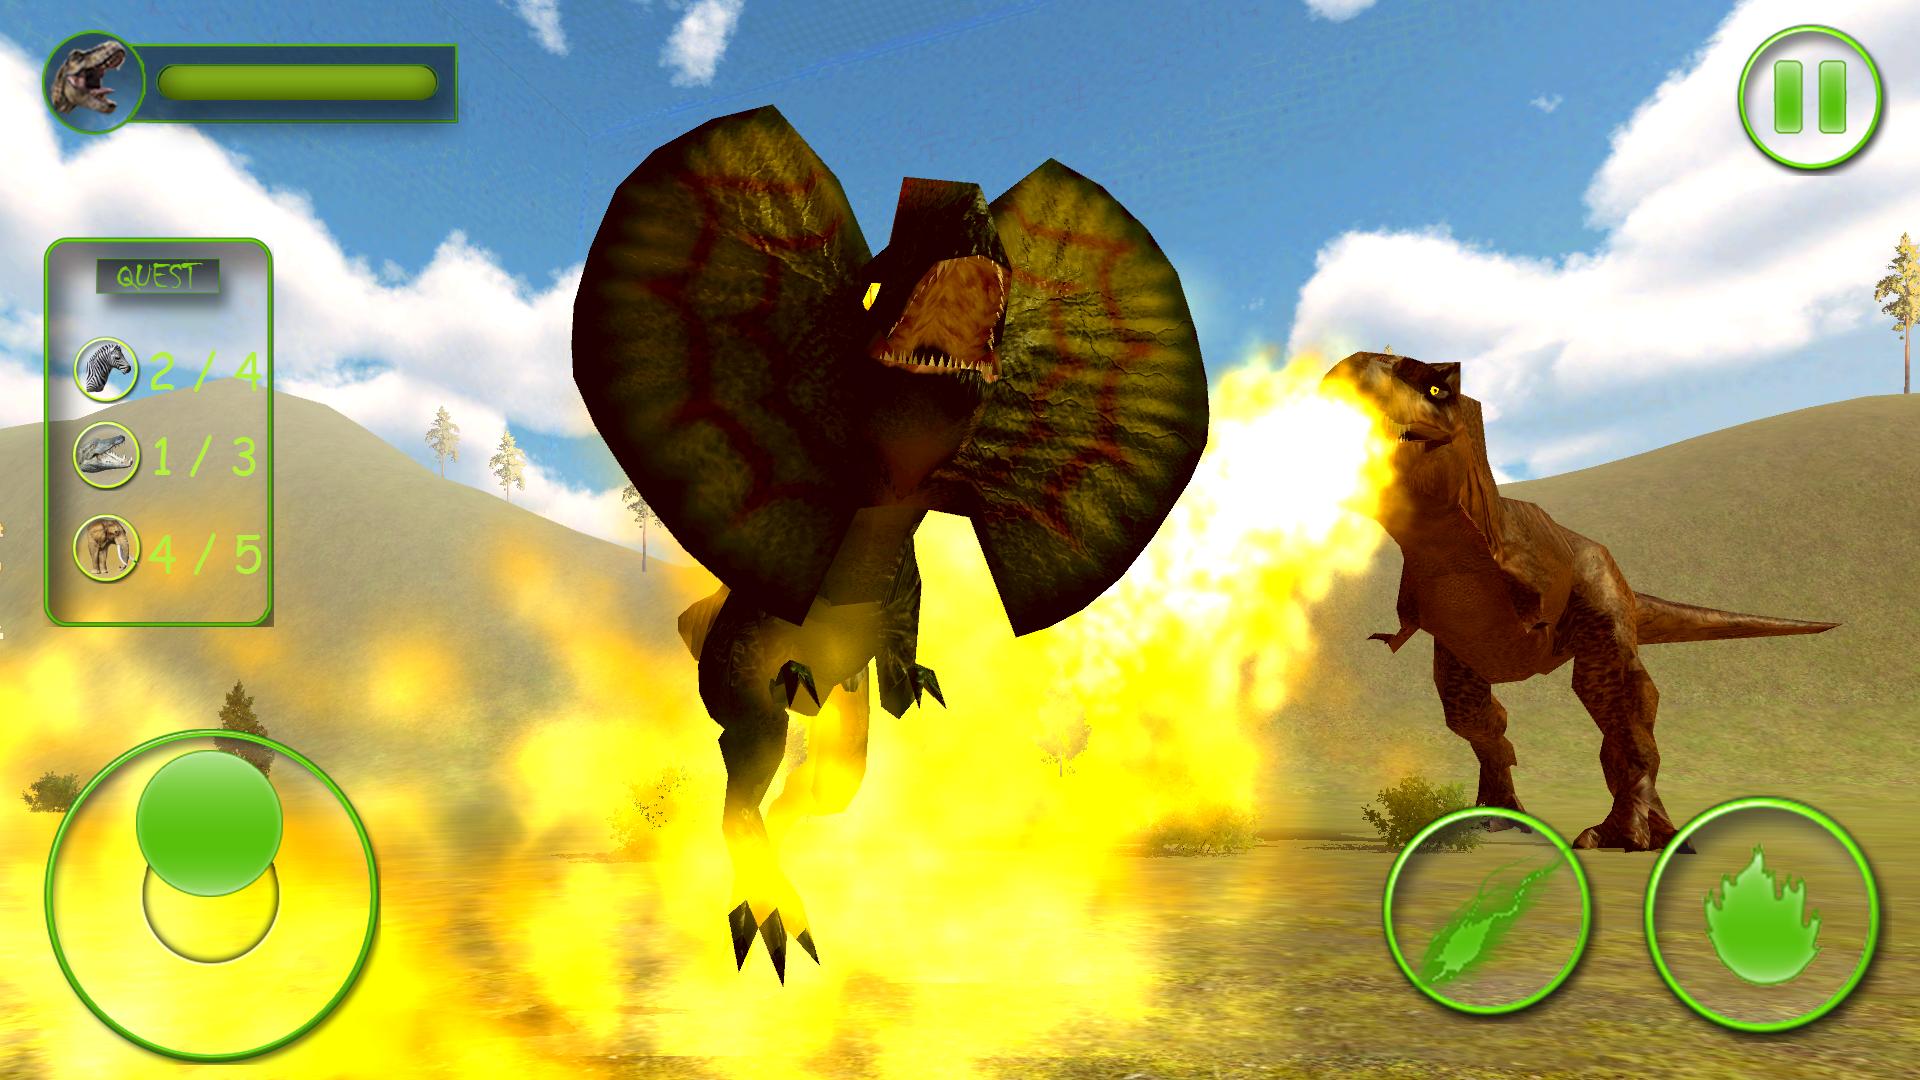 Real Dinosaur Simulator Games Dino Attack 3d For Android Apk Download - roblox adventures dinosaur simulator play as an